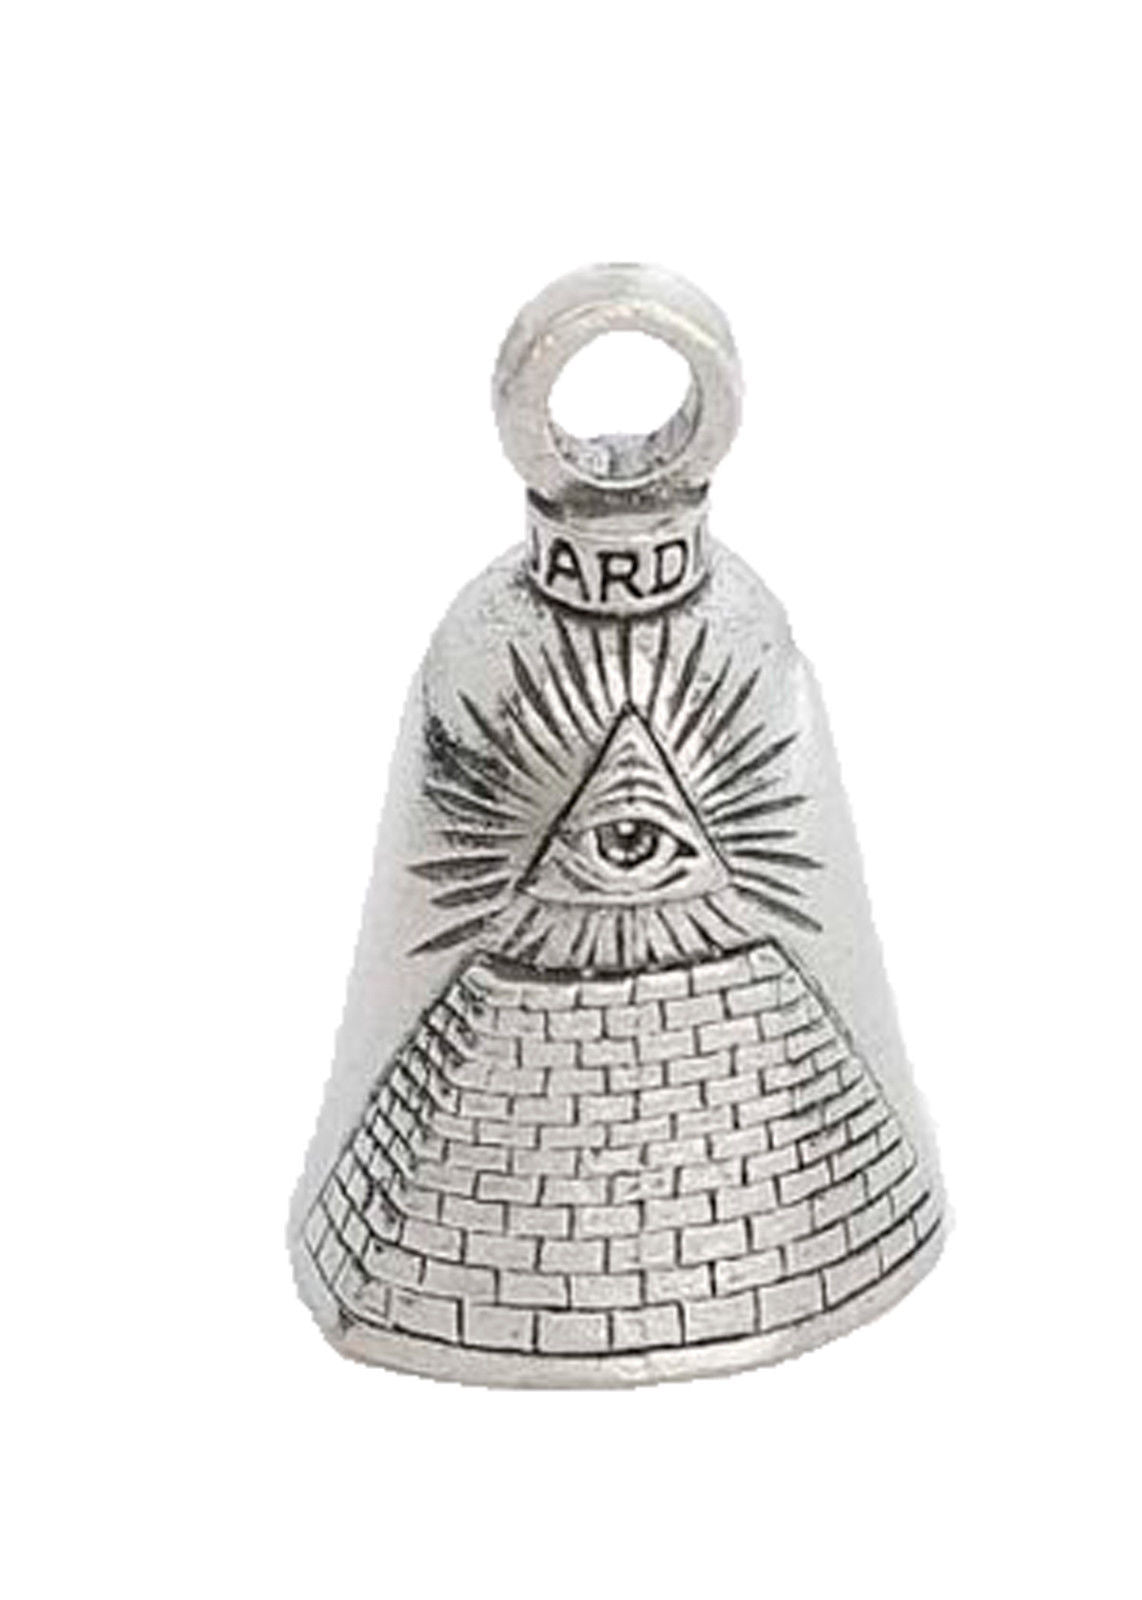 EYE OF PROVIDENCE GUARDIAN BELL compatible with HARLEY BIKER BELL RIDE TO LIVE